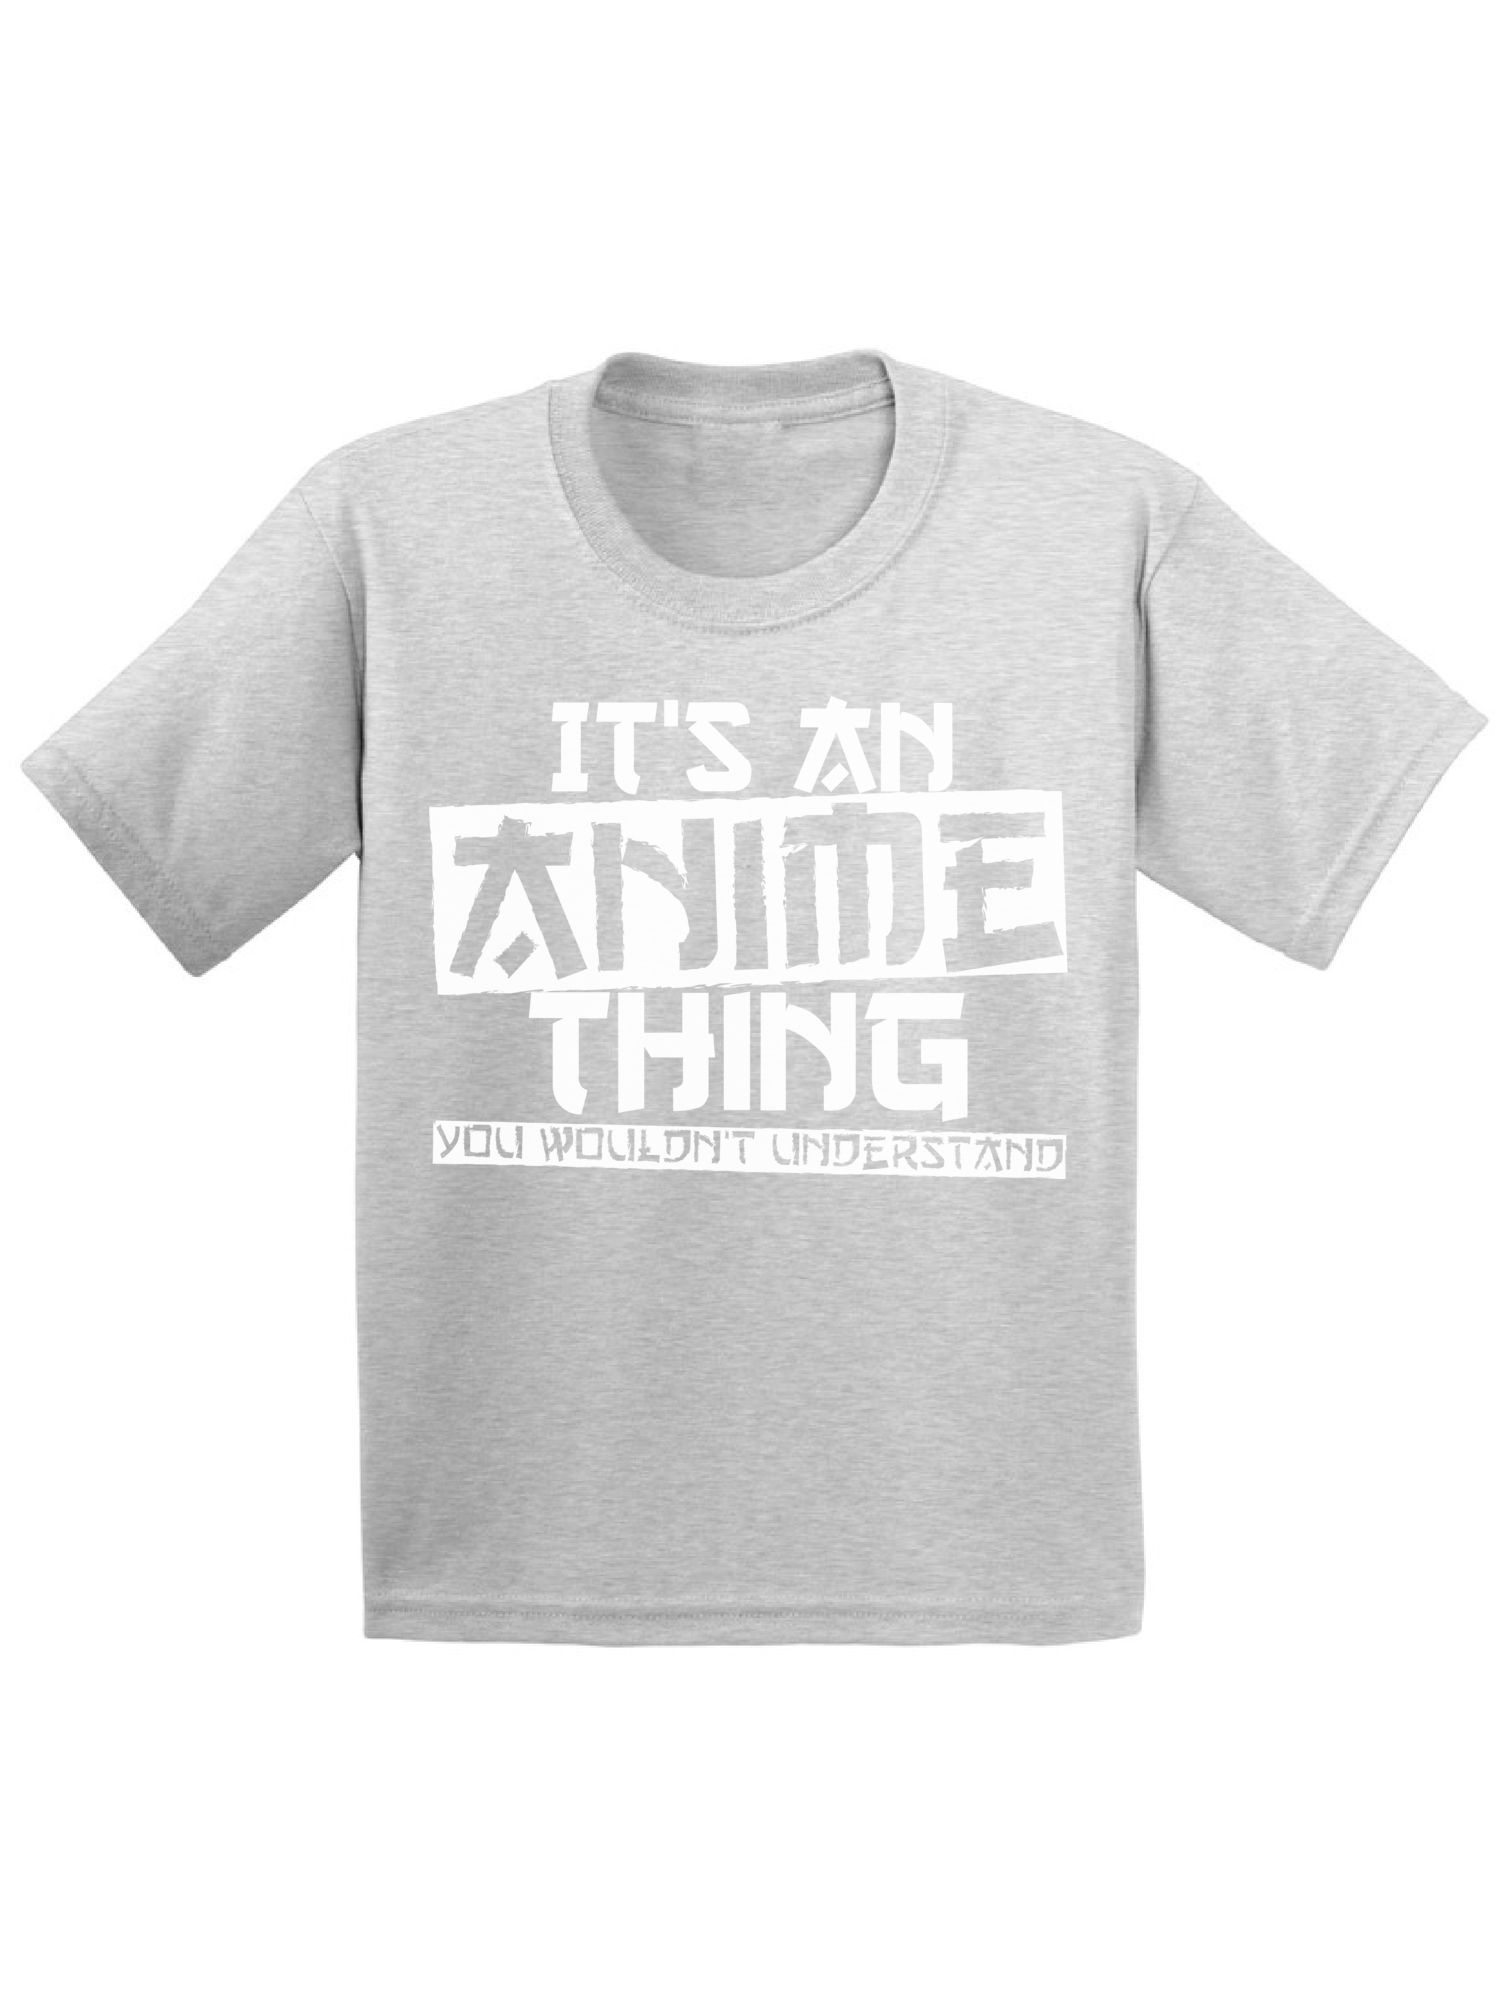 Anime Youth Shirt for Girls Anime Thing T-Shirt Cosplay Tees for Boys Its An Anime Thing You Wouldn't Understand Top Animation Fans - image 1 of 4